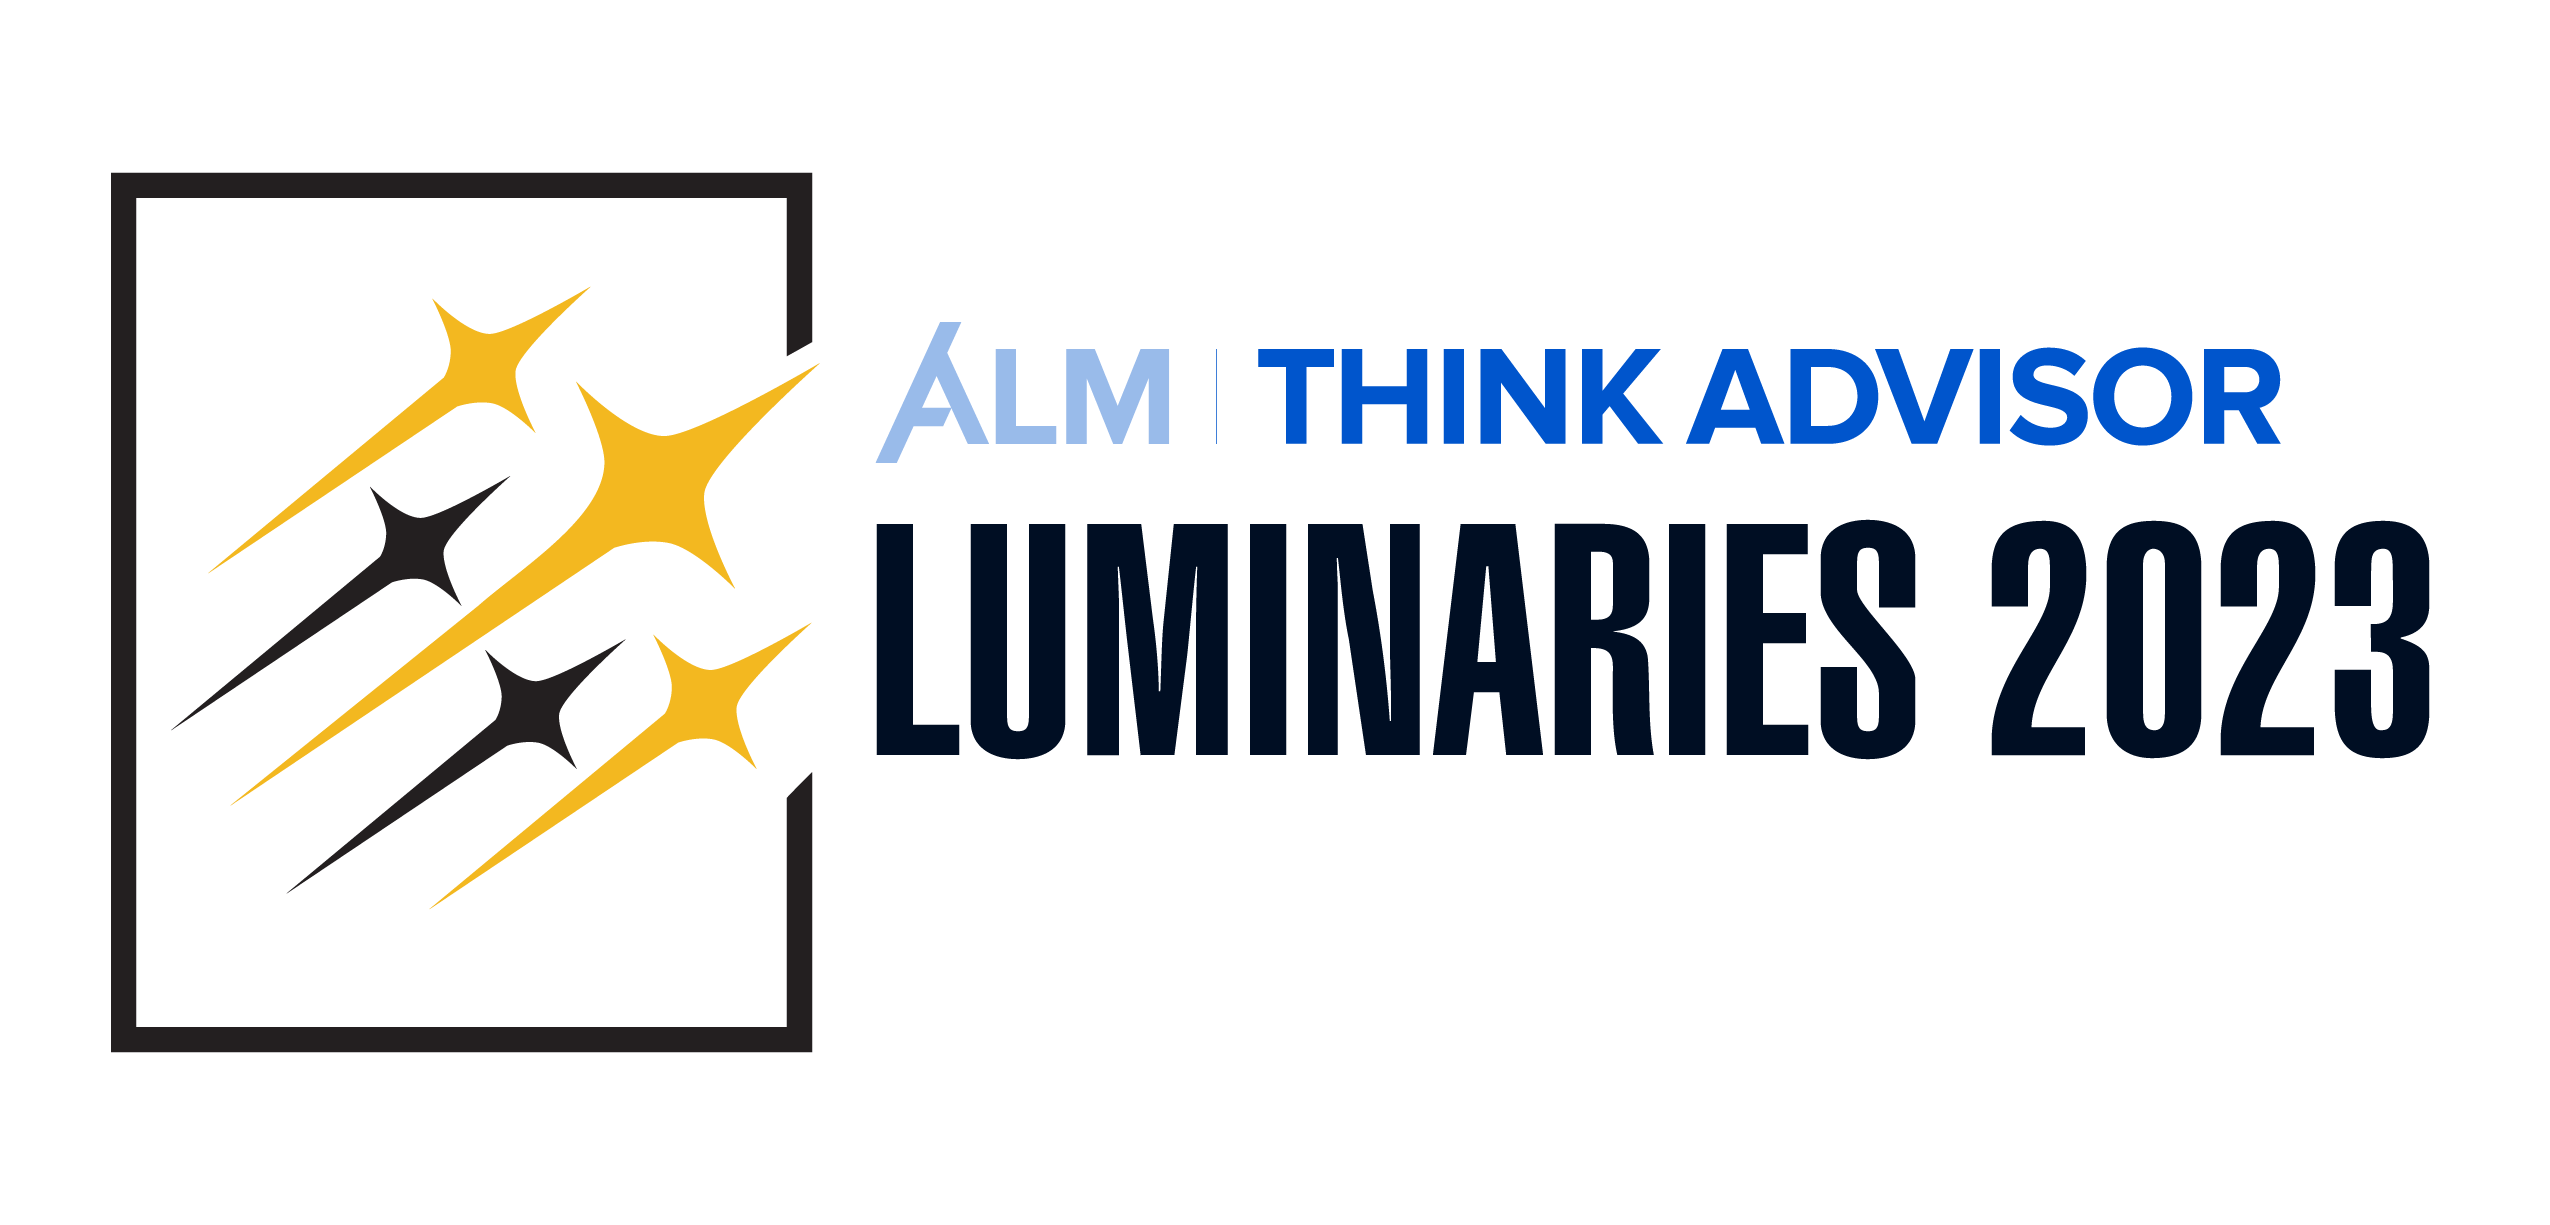 ALM publication badges and award licensing